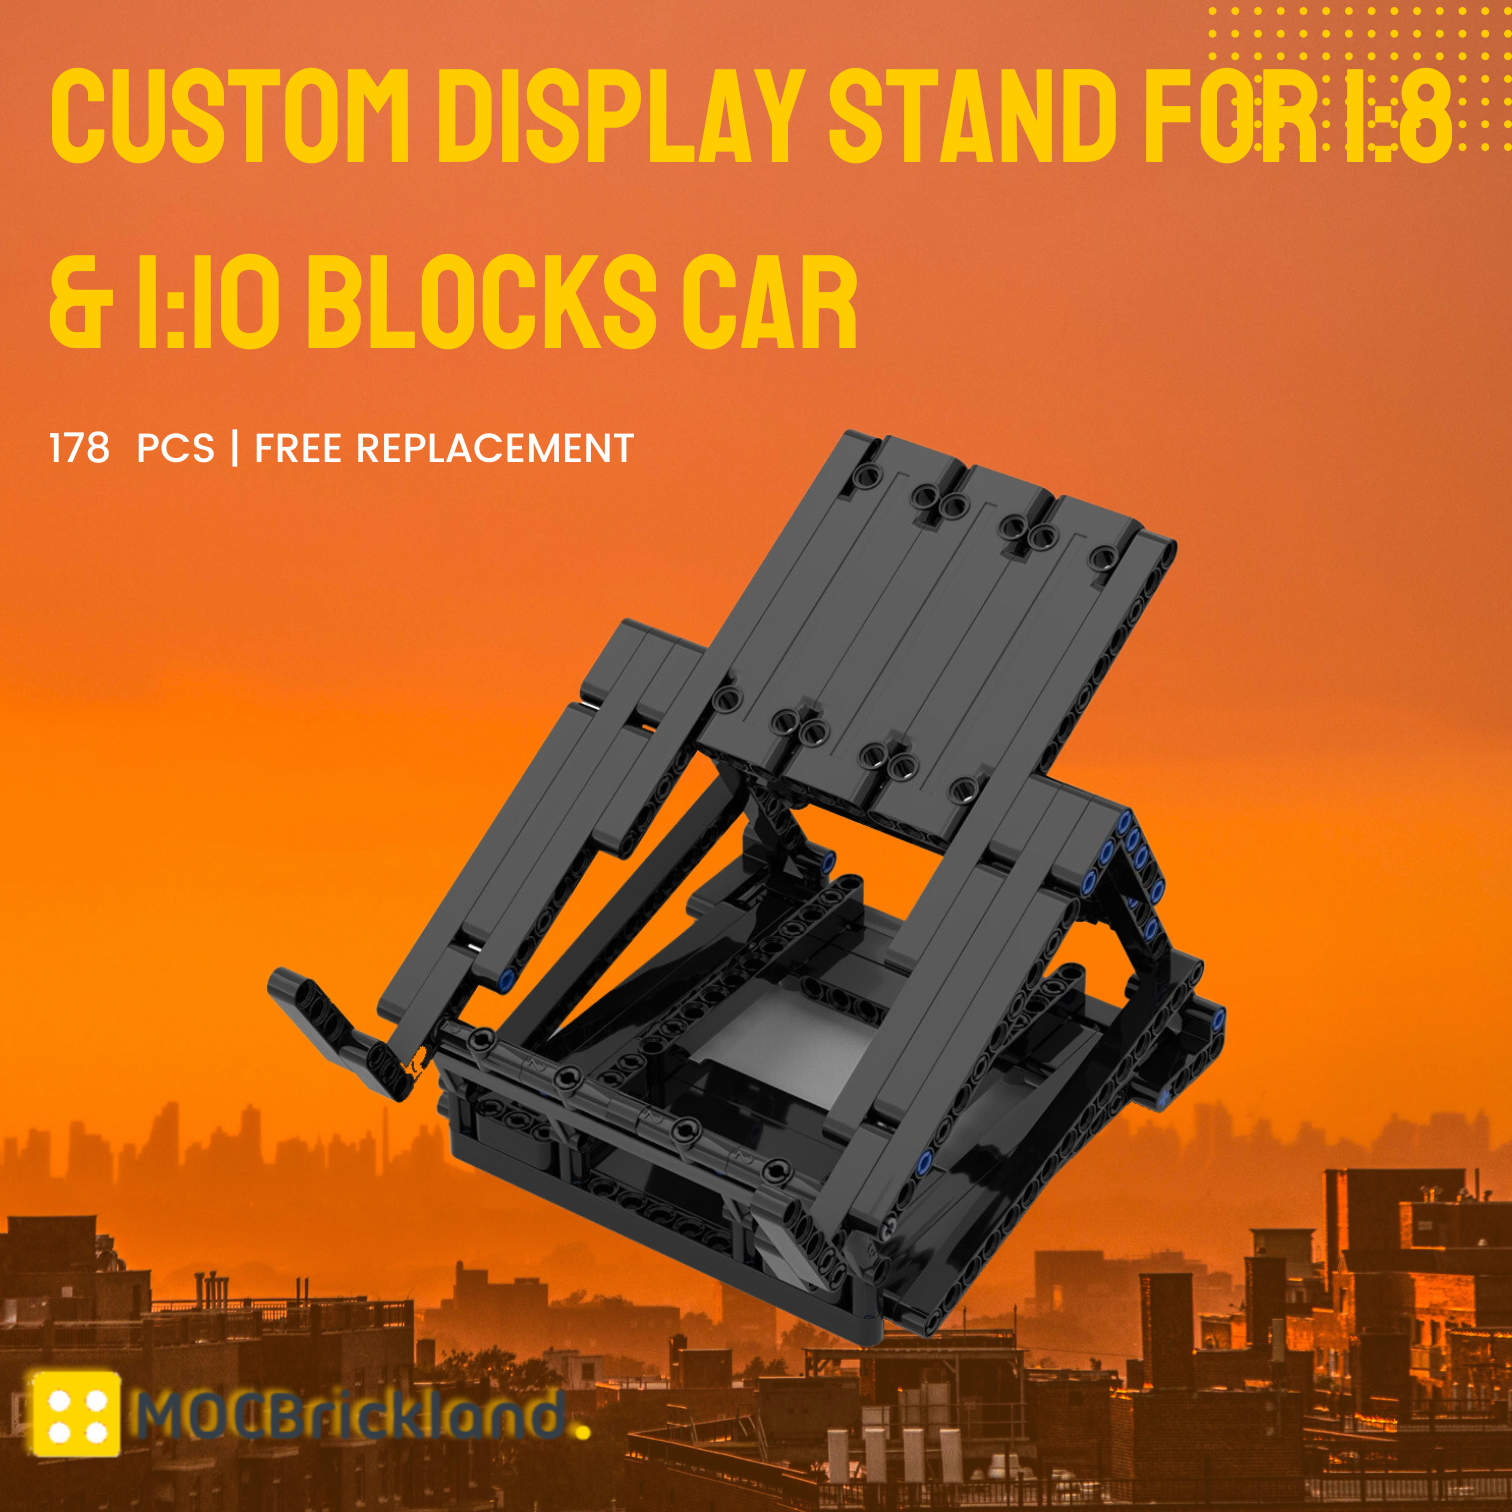 Custom Display Stand for 1:8 & 1:10 Blocks Car MOC-94312 Technic With 178pcs